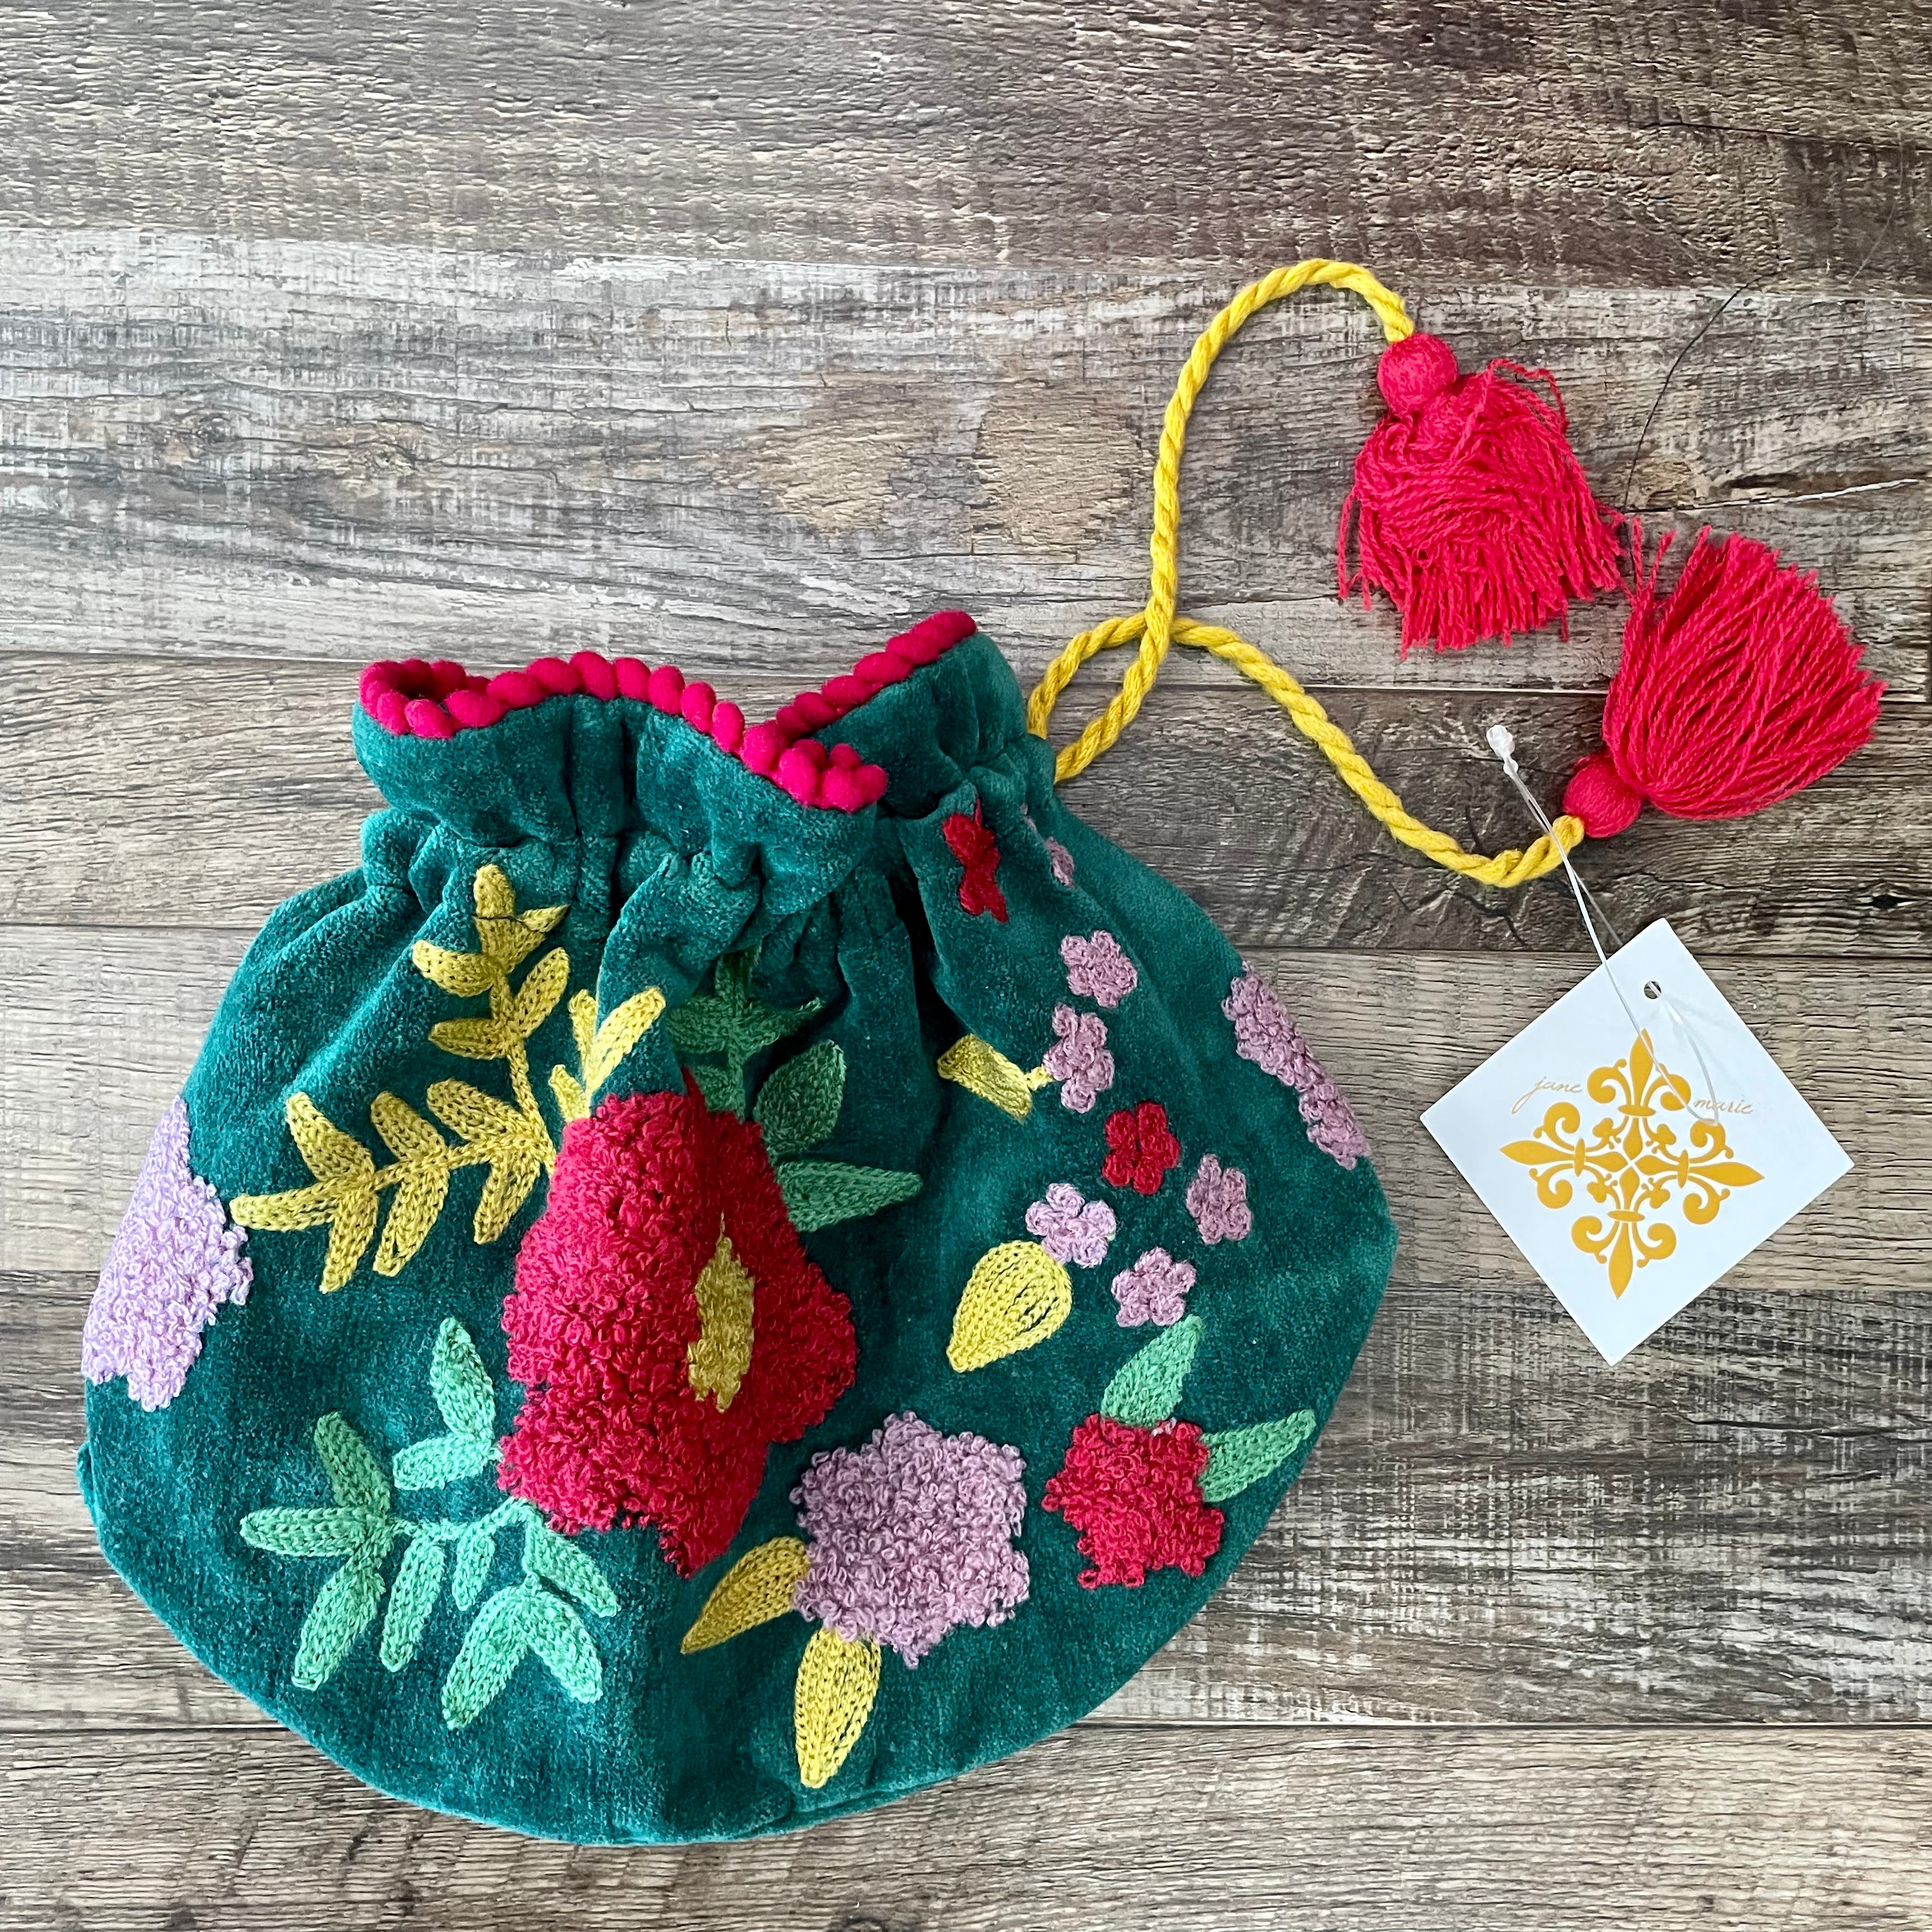 Blooming Jewelry Pouch